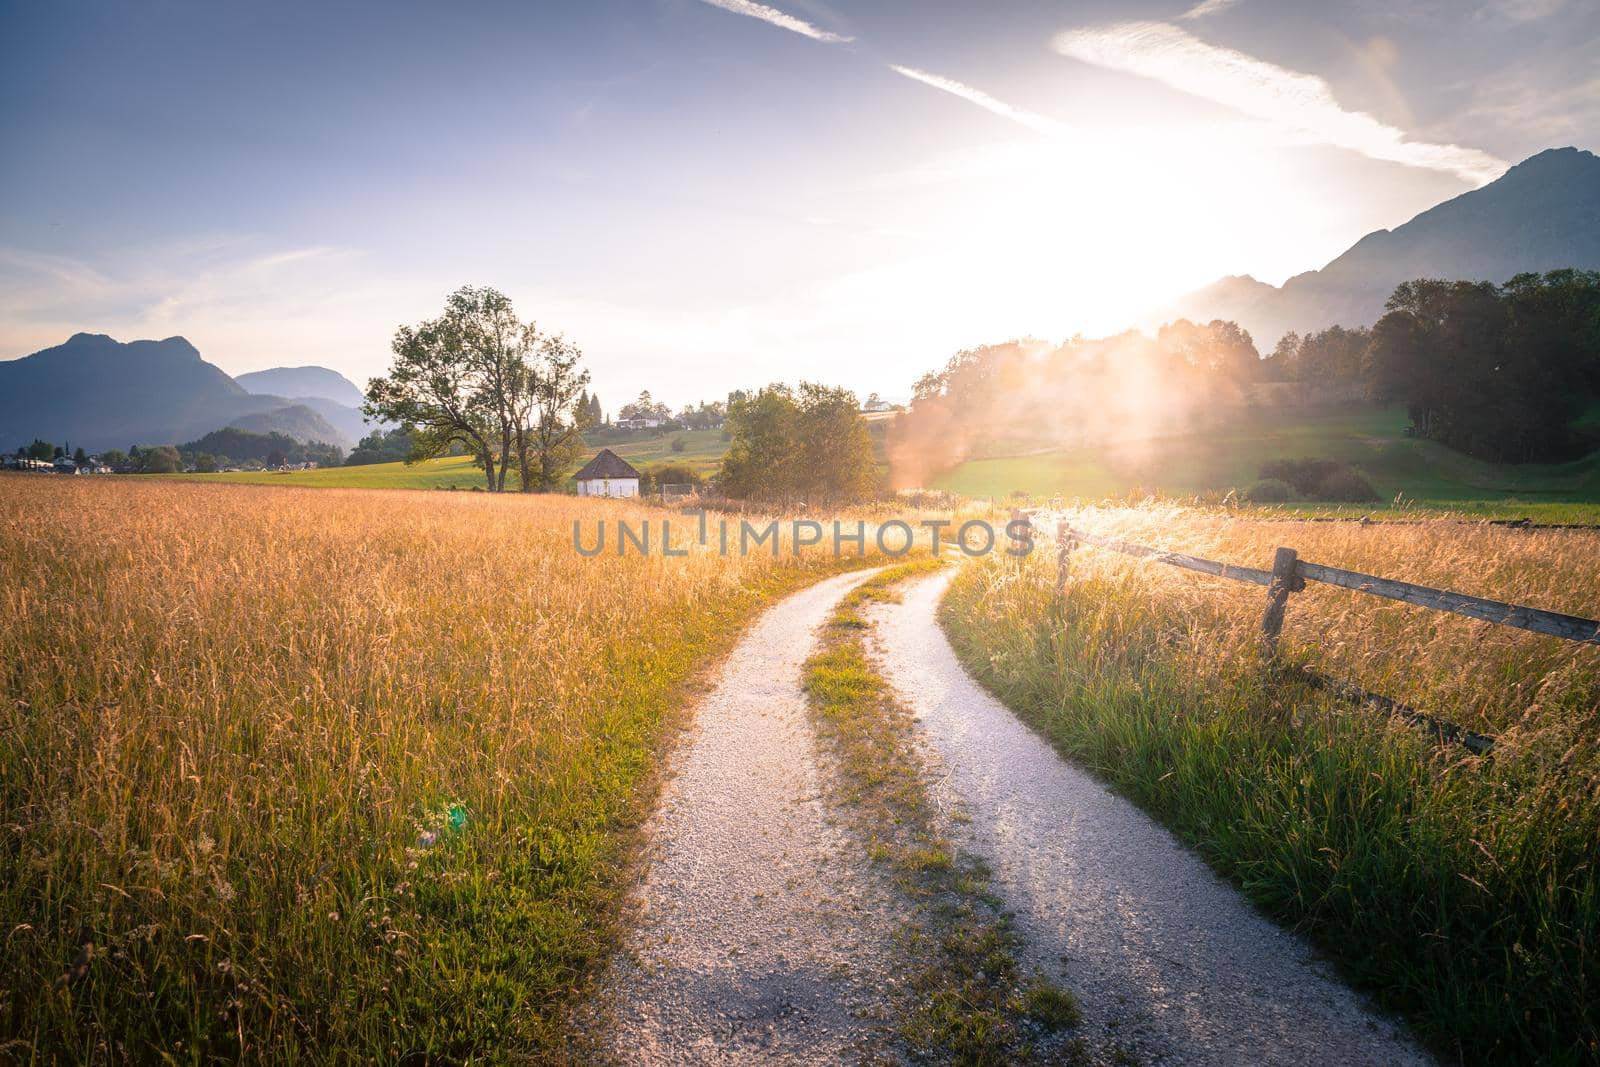 Scenic sunset view over country road, meadow, hills and mountains.